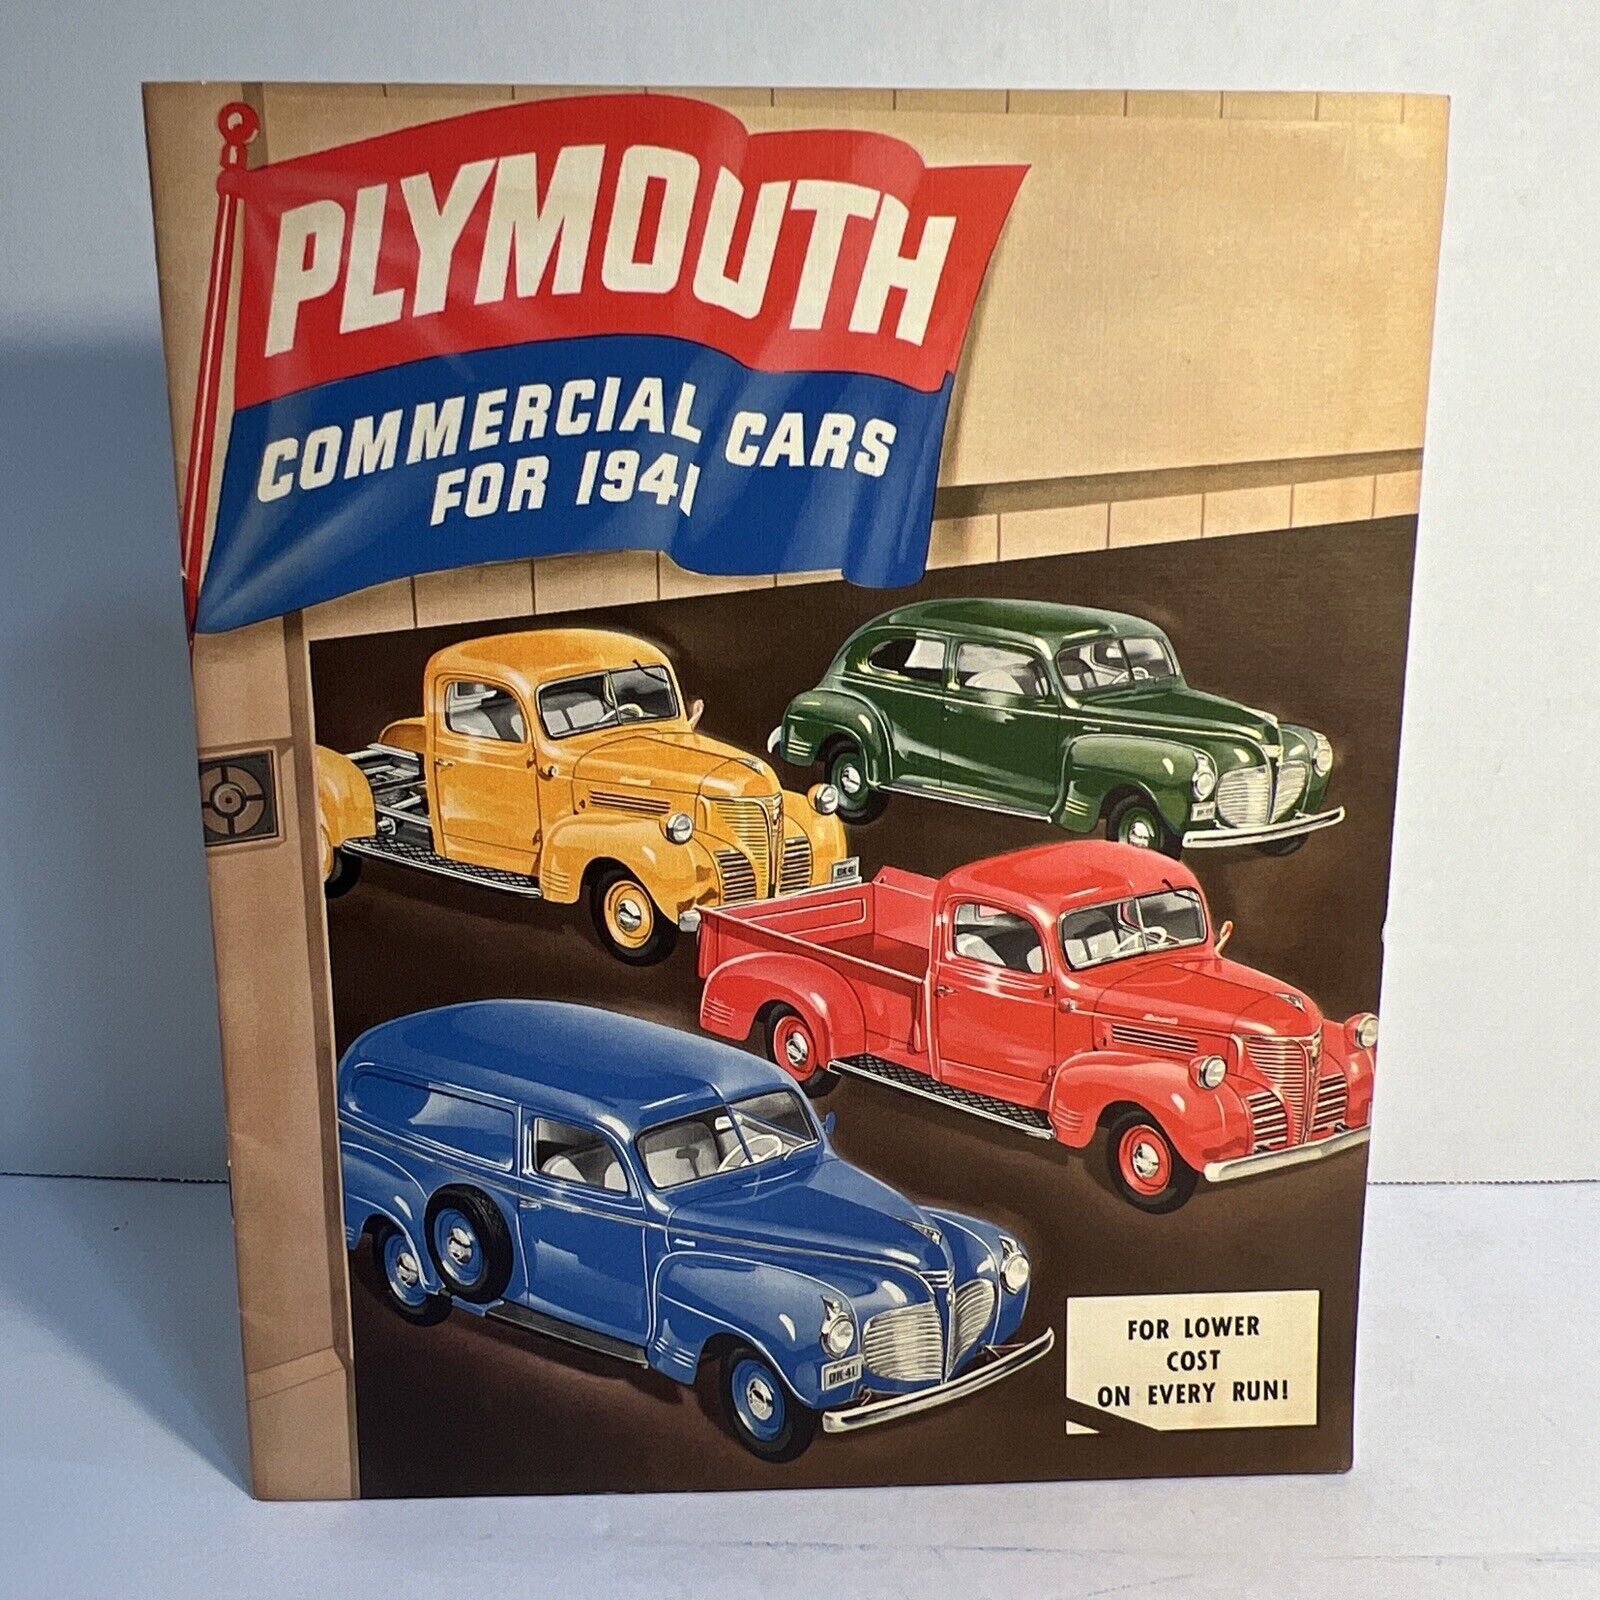 1941 PLYMOUTH Commercial Cars ORIGINAL Color Catalog Brochure - MUST SEE RARE